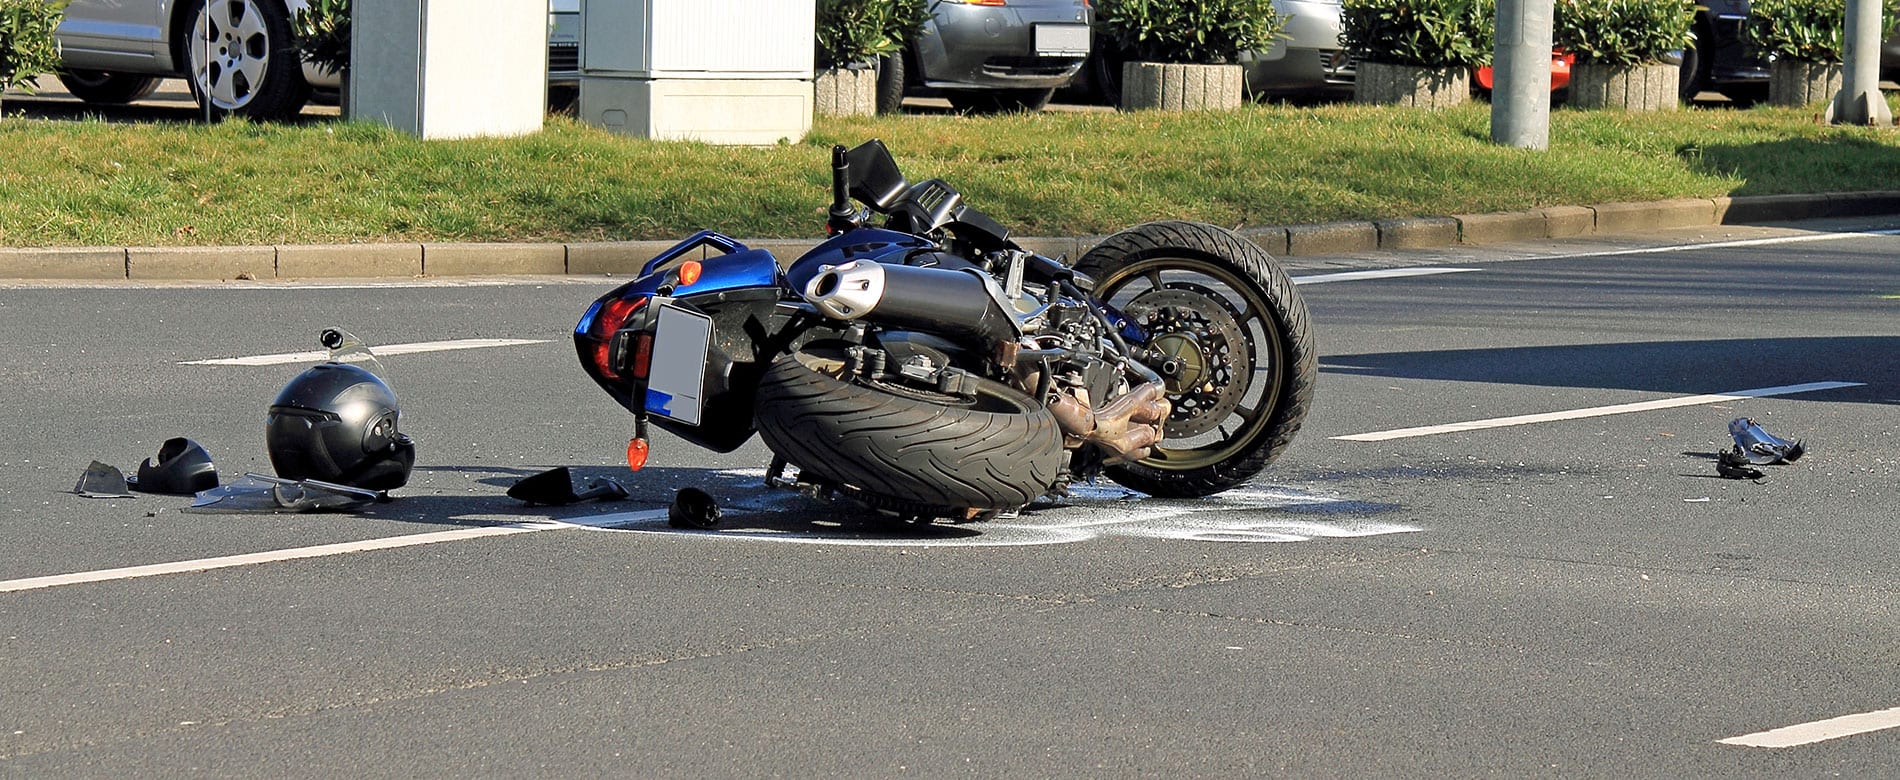 morcycle accident